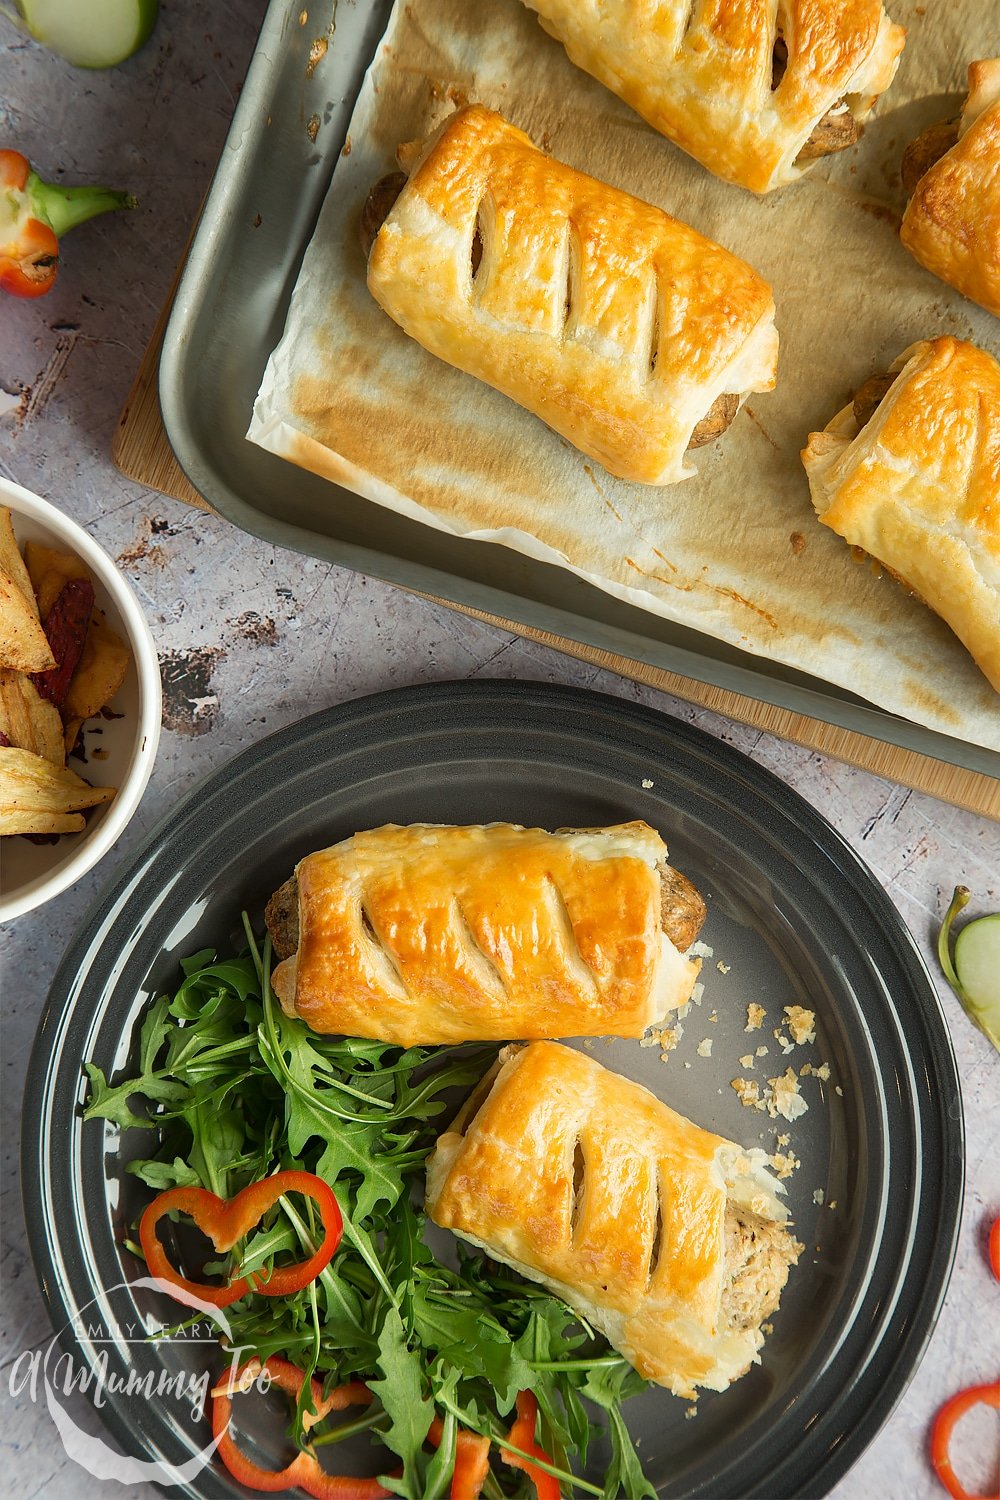 Two vegetarian sausage rolls on a plate with salad and pastry crumbs.